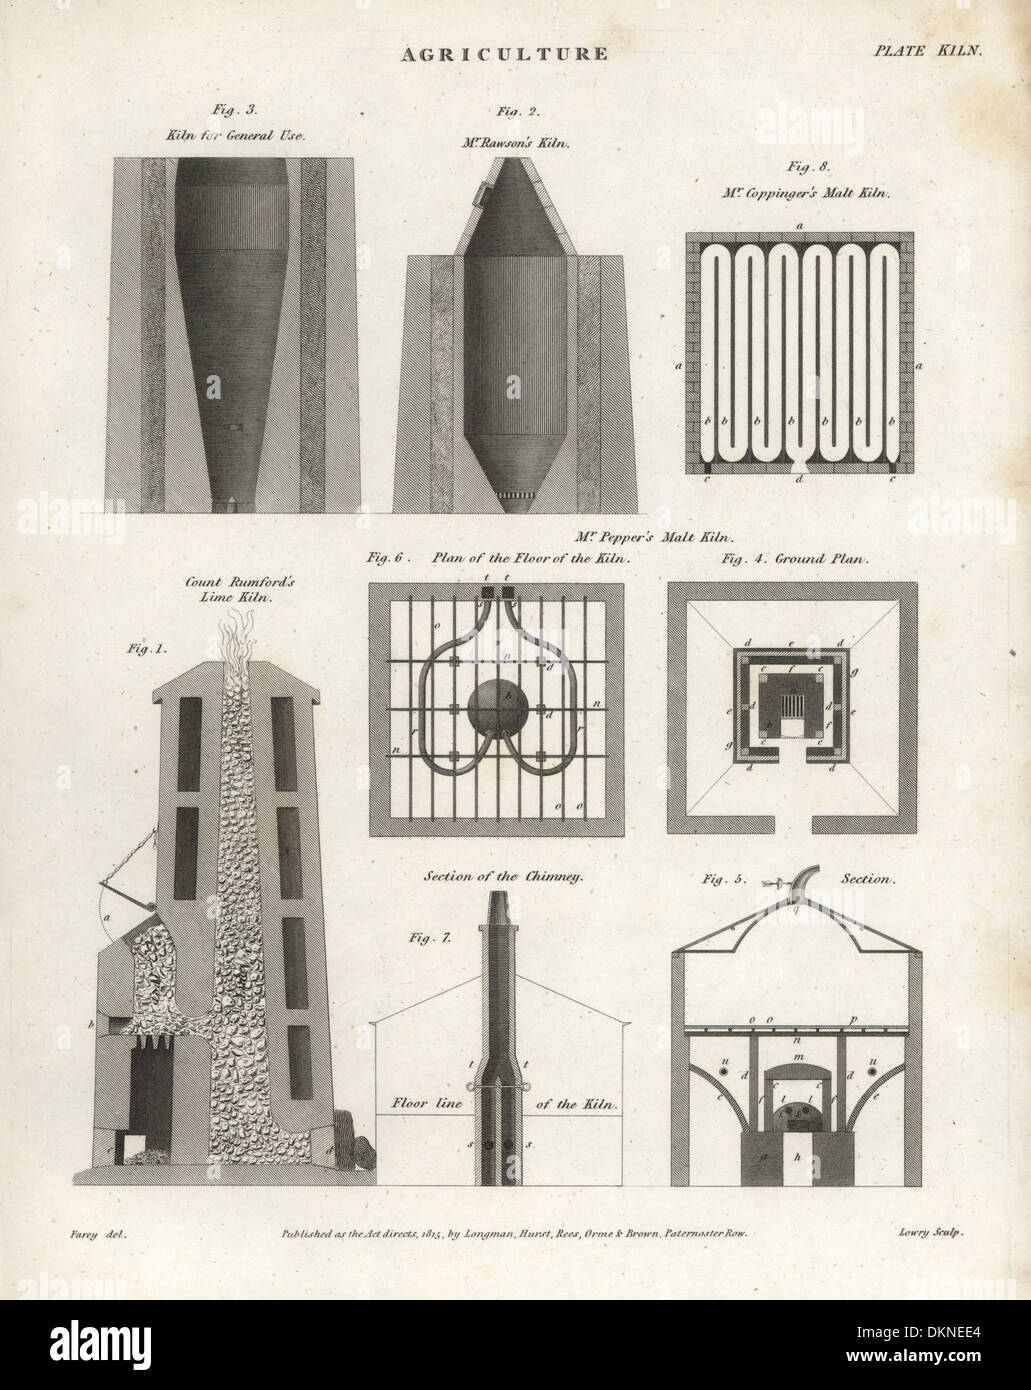 Plans and elevations of agricultural kilns, 19thC. Stock Photo